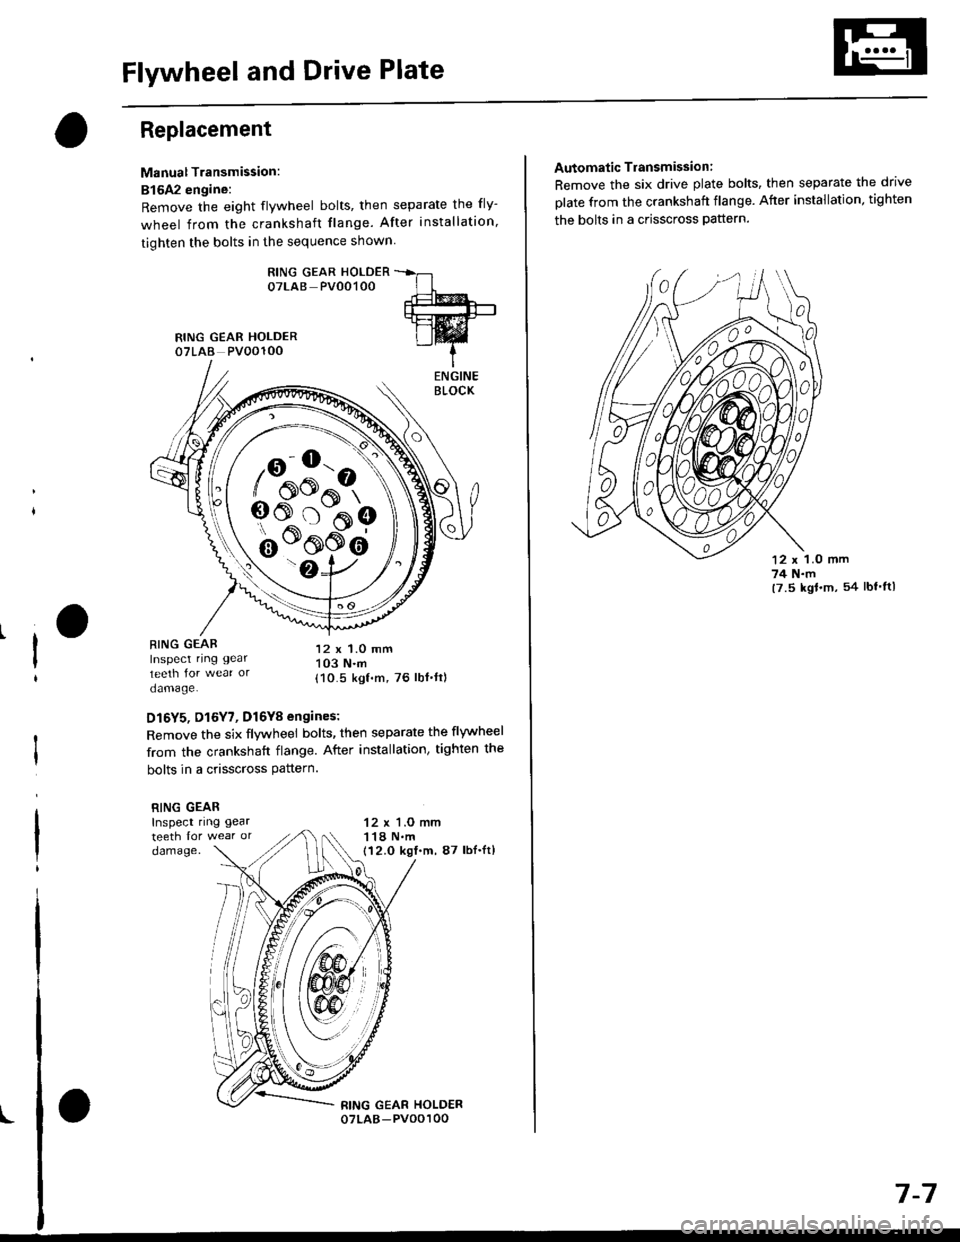 HONDA CIVIC 1996 6.G Owners Guide Flywheel and Drive Plate
Replacement
Manual Transmission:
816A2 engine:
Remove the eight flywheel bolts, then separate the fly-
wheel from the crankshaft flange. After installation
tiohten the bolts 